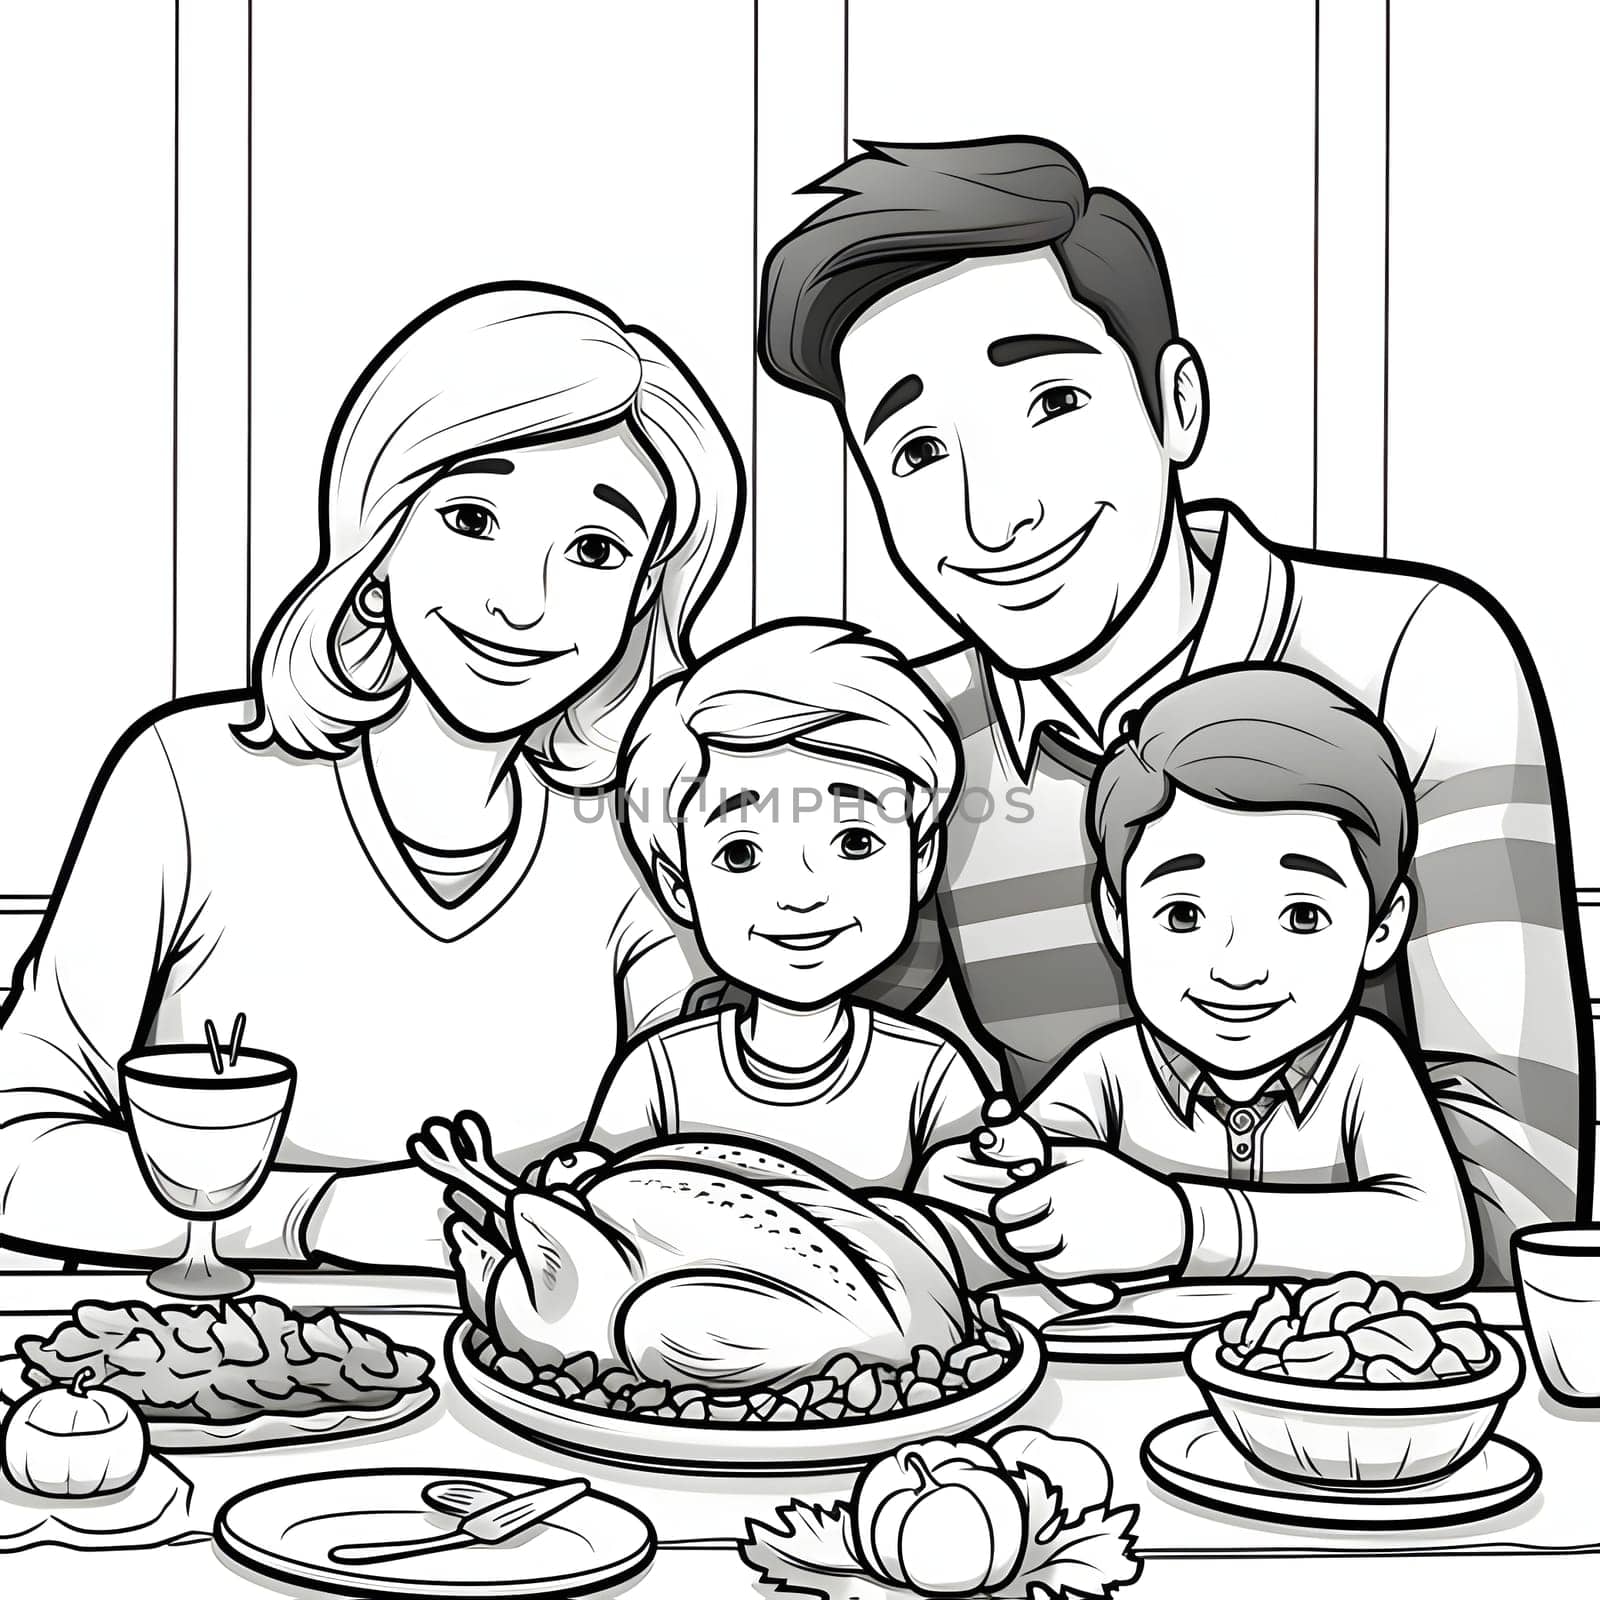 Black and White coloring book happy family at the Thanksgiving table. Turkey as the main dish of thanksgiving for the harvest. by ThemesS